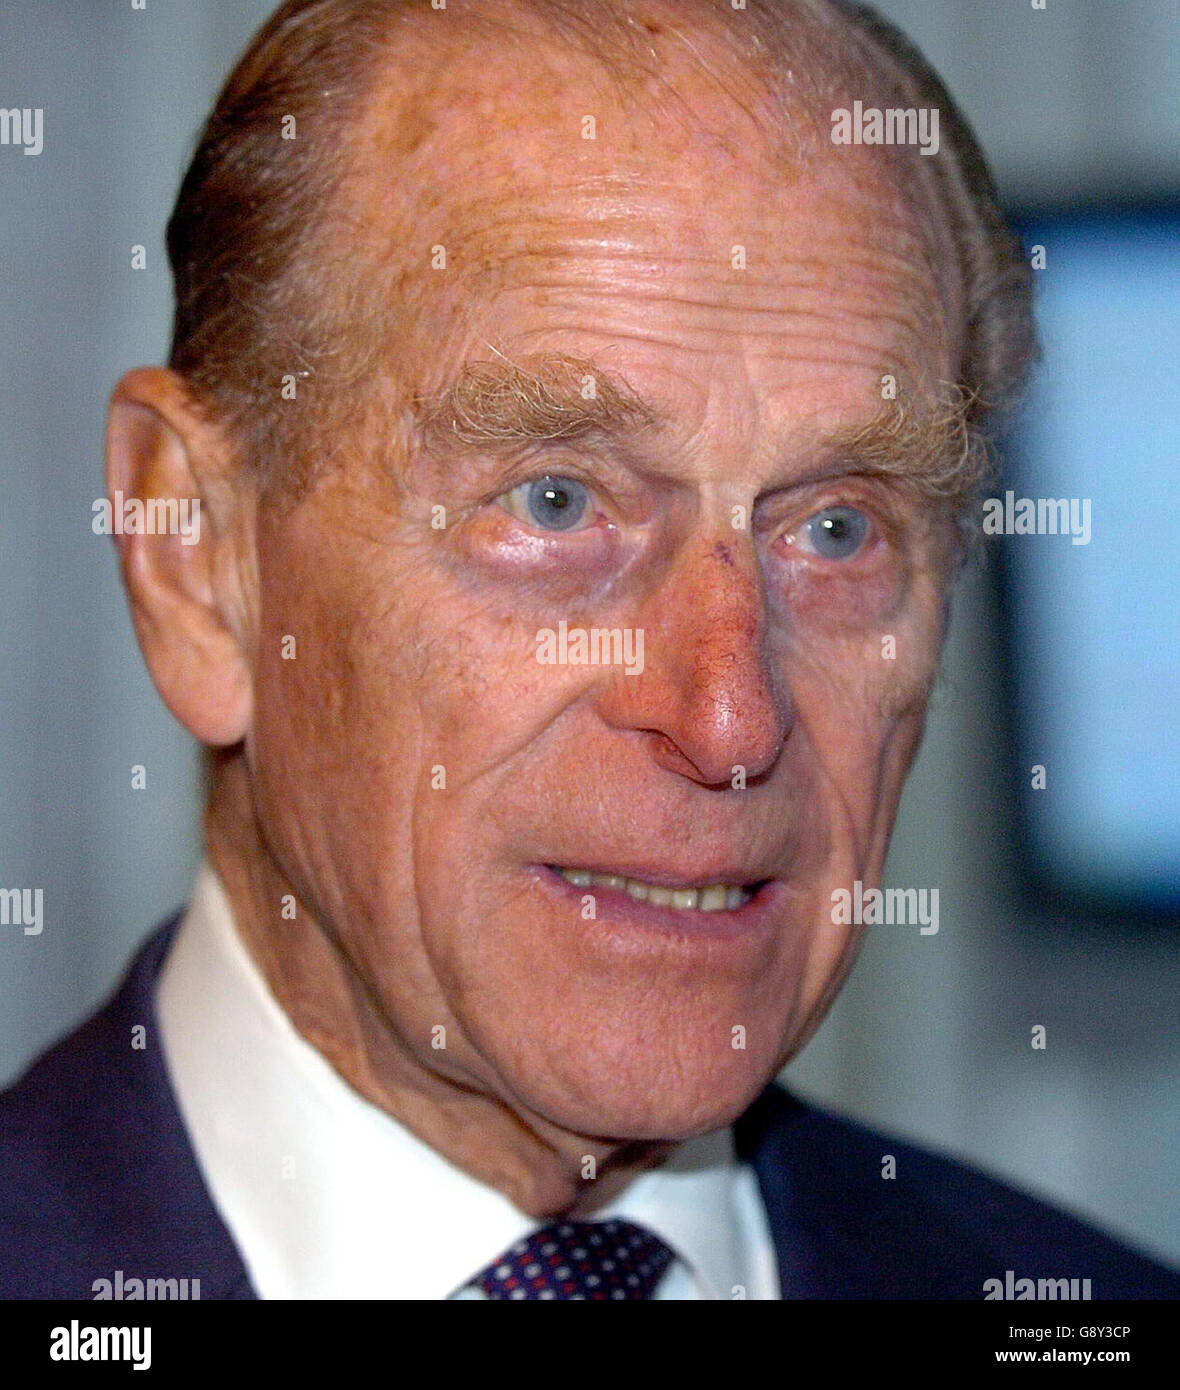 The Duke of Edinburgh during a visit to the Helping Hands for the Needy charity, which is co-ordinating relief for victims of the Asian earthquake, at Stratford, east London, Thursday October 13, 2005. PRESS ASSOCIATION Photo. Photo credit should read: Michael Stephens/PA. Stock Photo